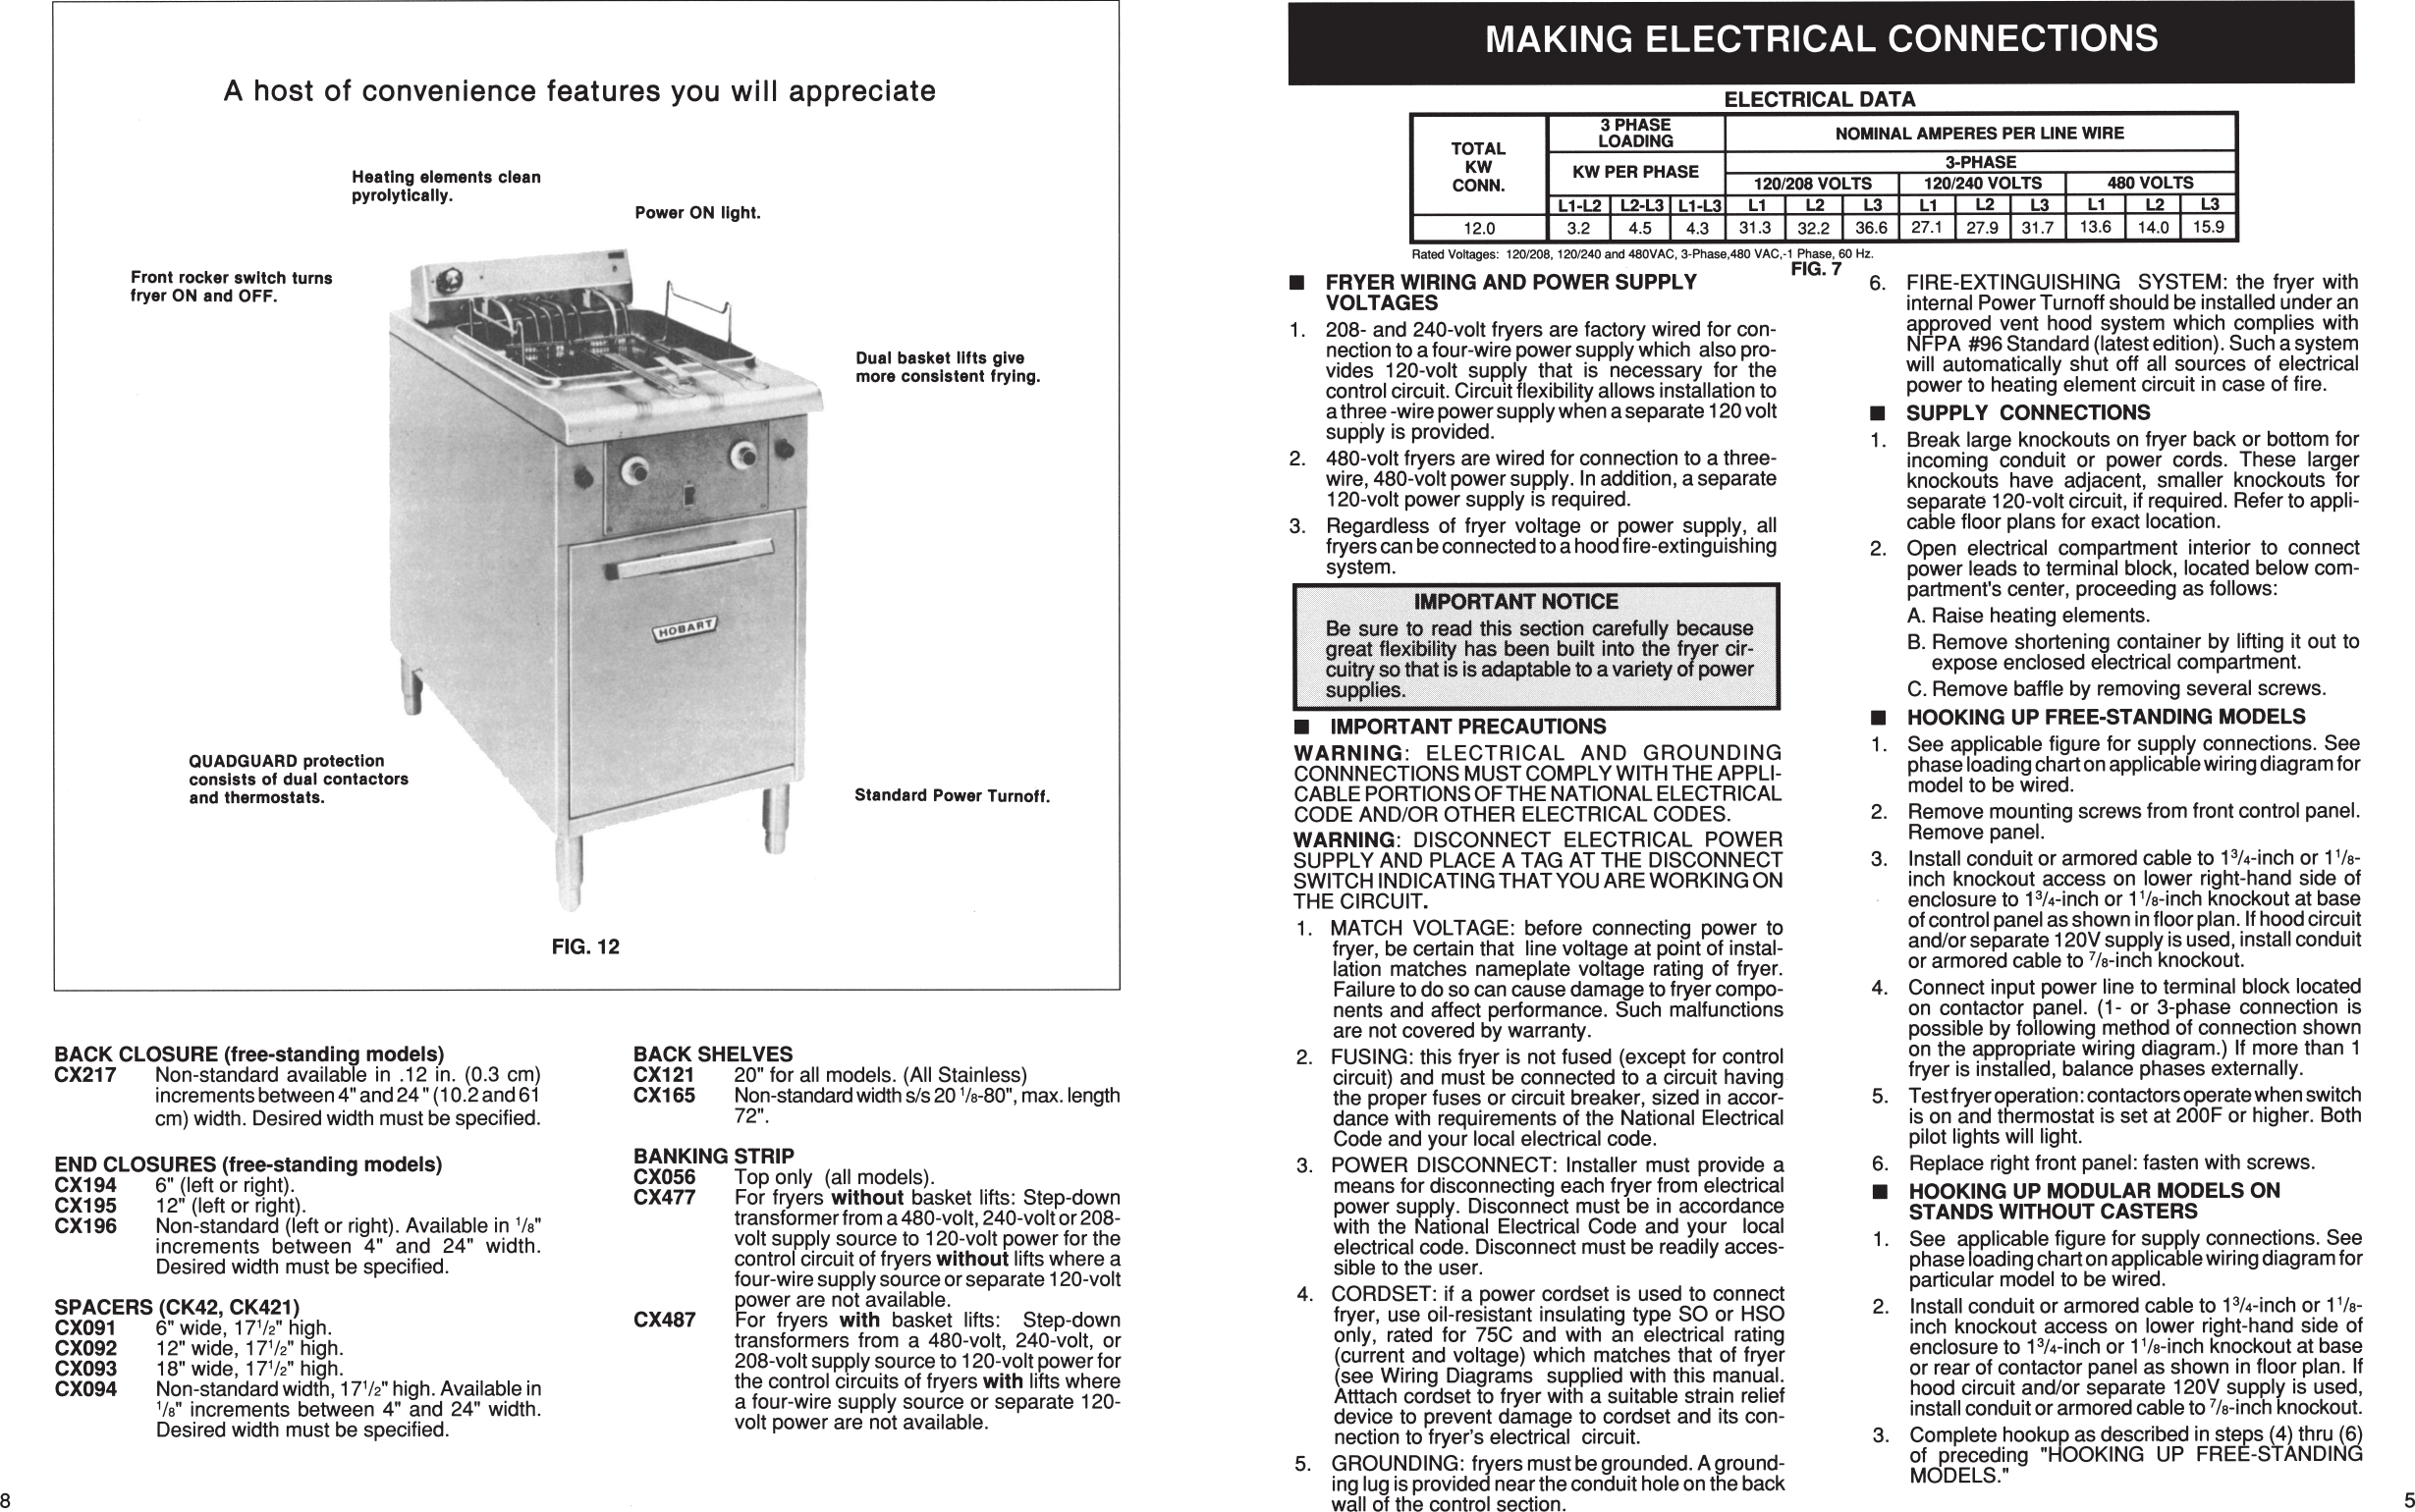 Page 8 of 12 - Hobart Hobart-Corp-Fryer-Ck40-Users-Manual- F27400  Hobart-corp-fryer-ck40-users-manual